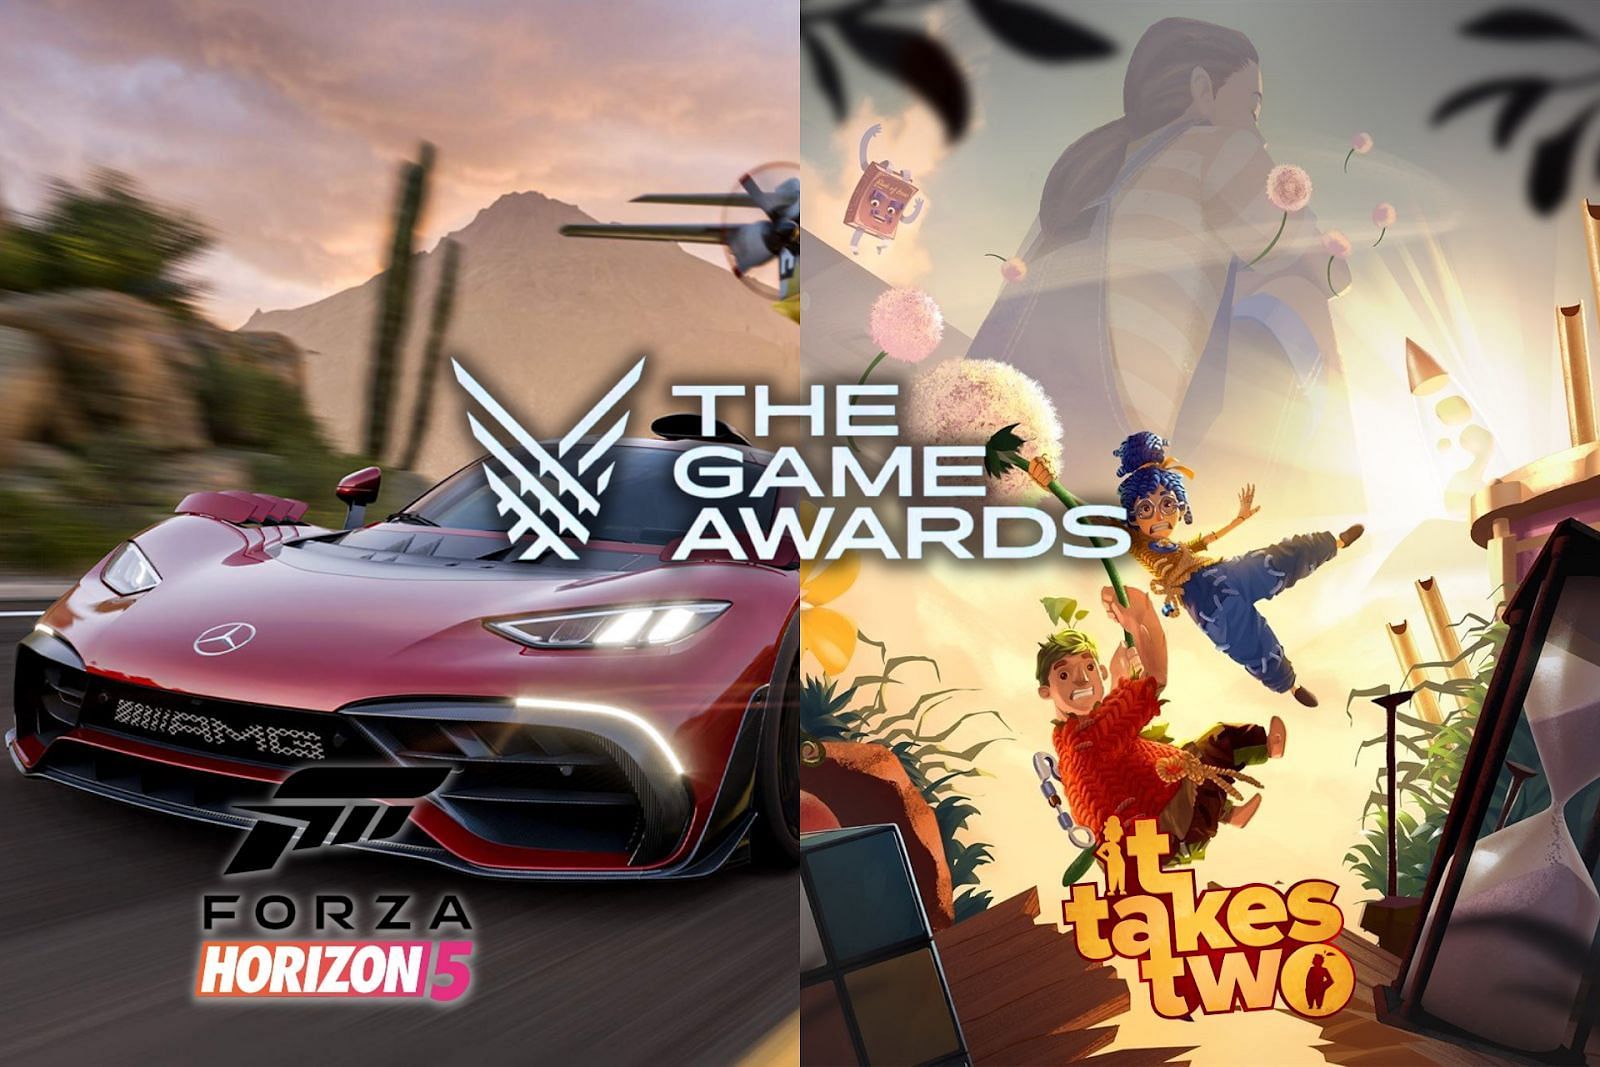 Forza Horizon 5 and It Takes Tow won 3 awards each at The Game Awards 2021 (Image by Sportskeeda)